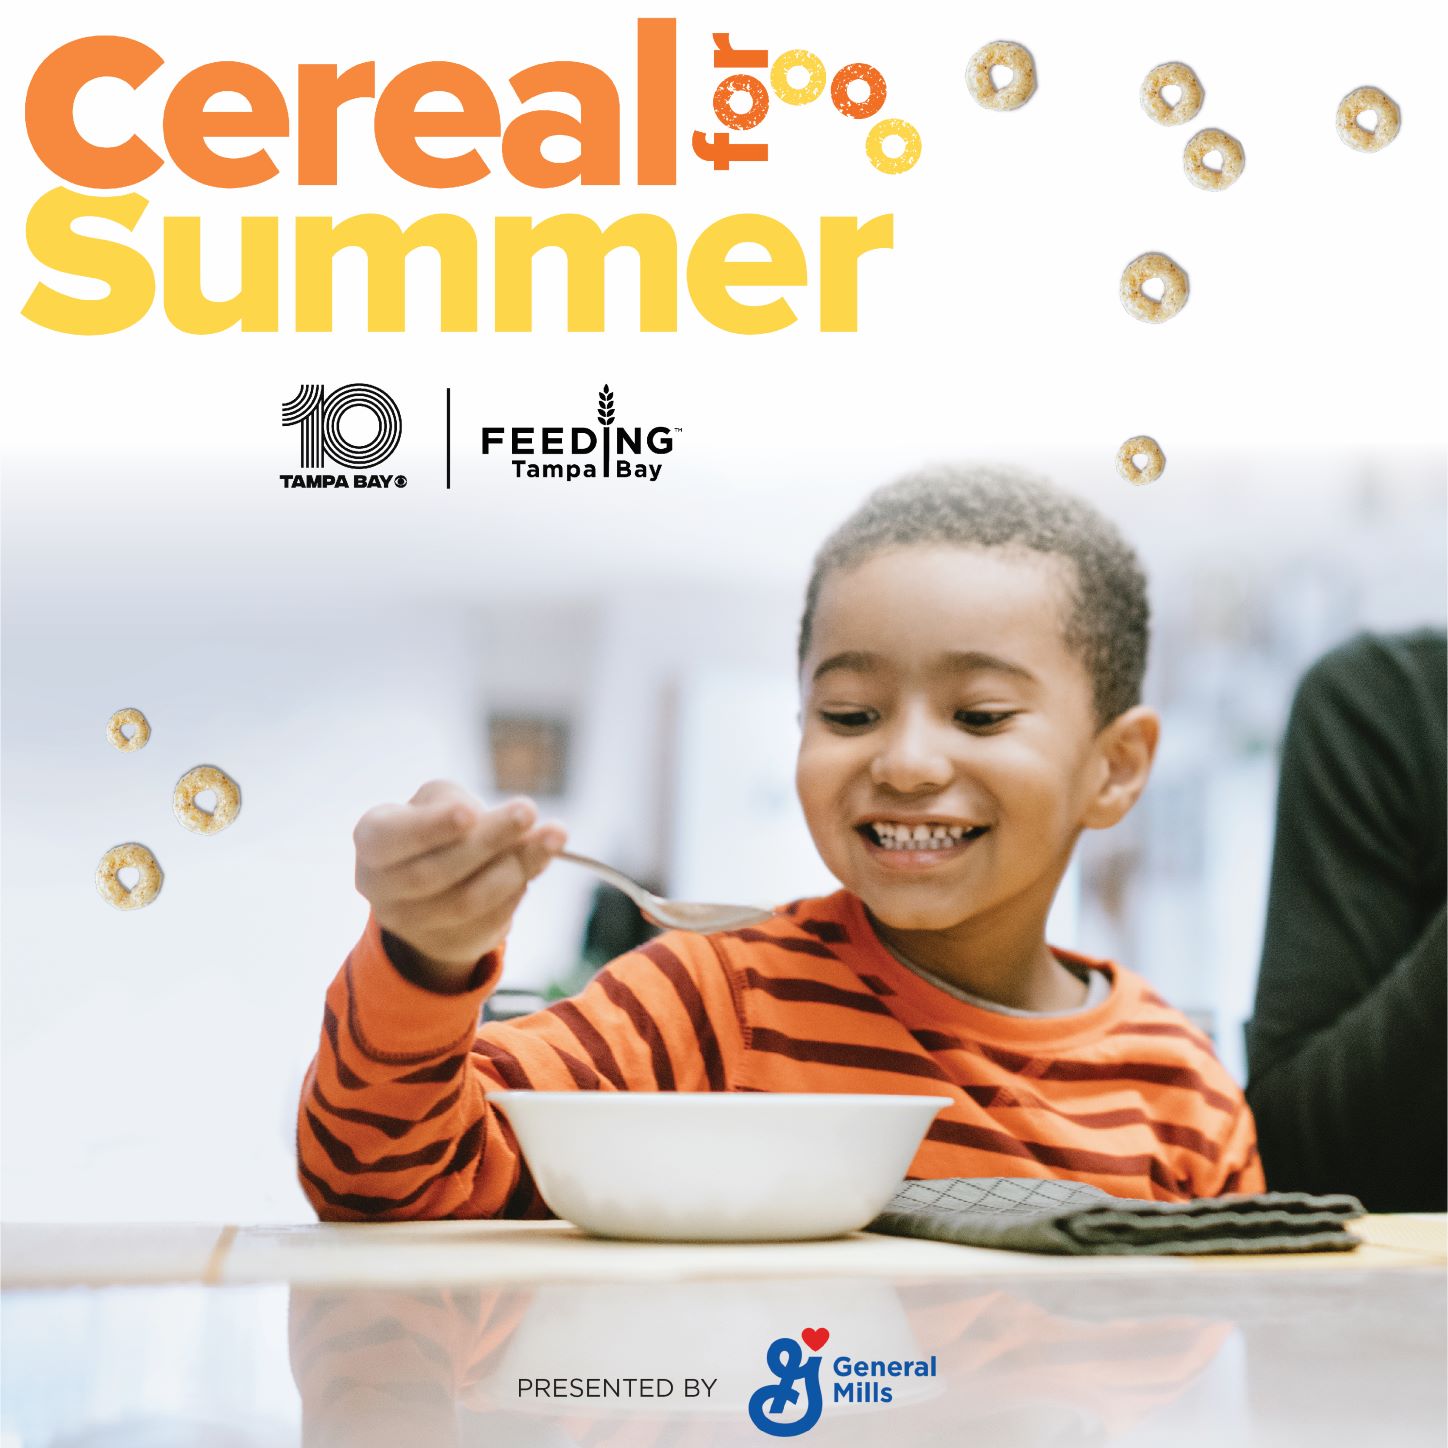 Young boy eating cereal, promoting Cereal for Summer